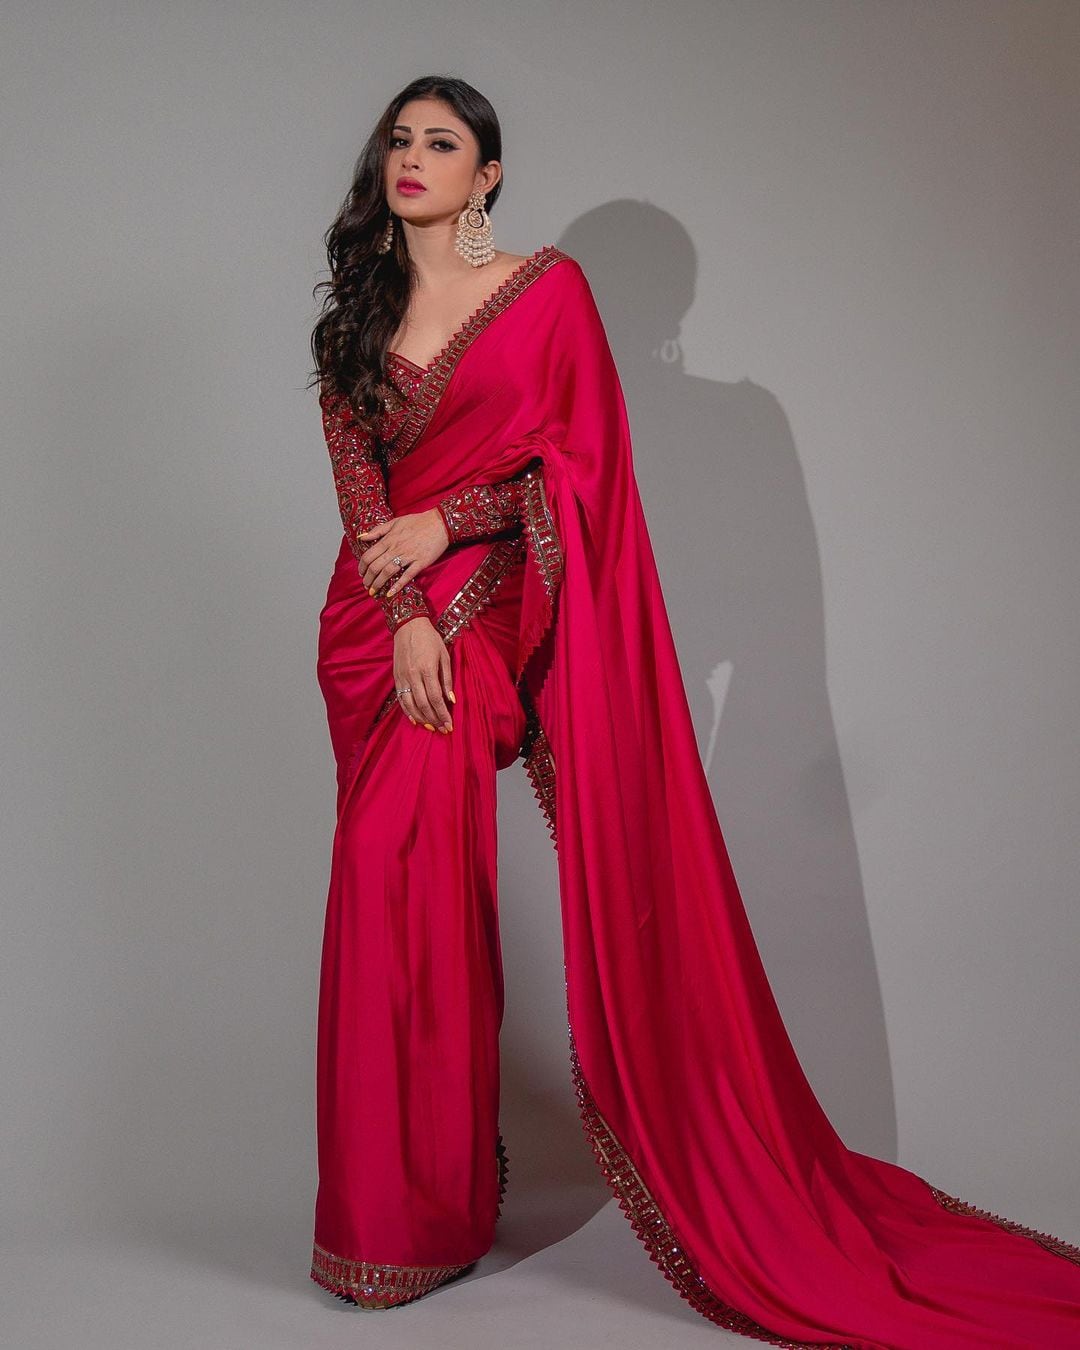 Mouni Roy looks breathtaking in the deep red saree